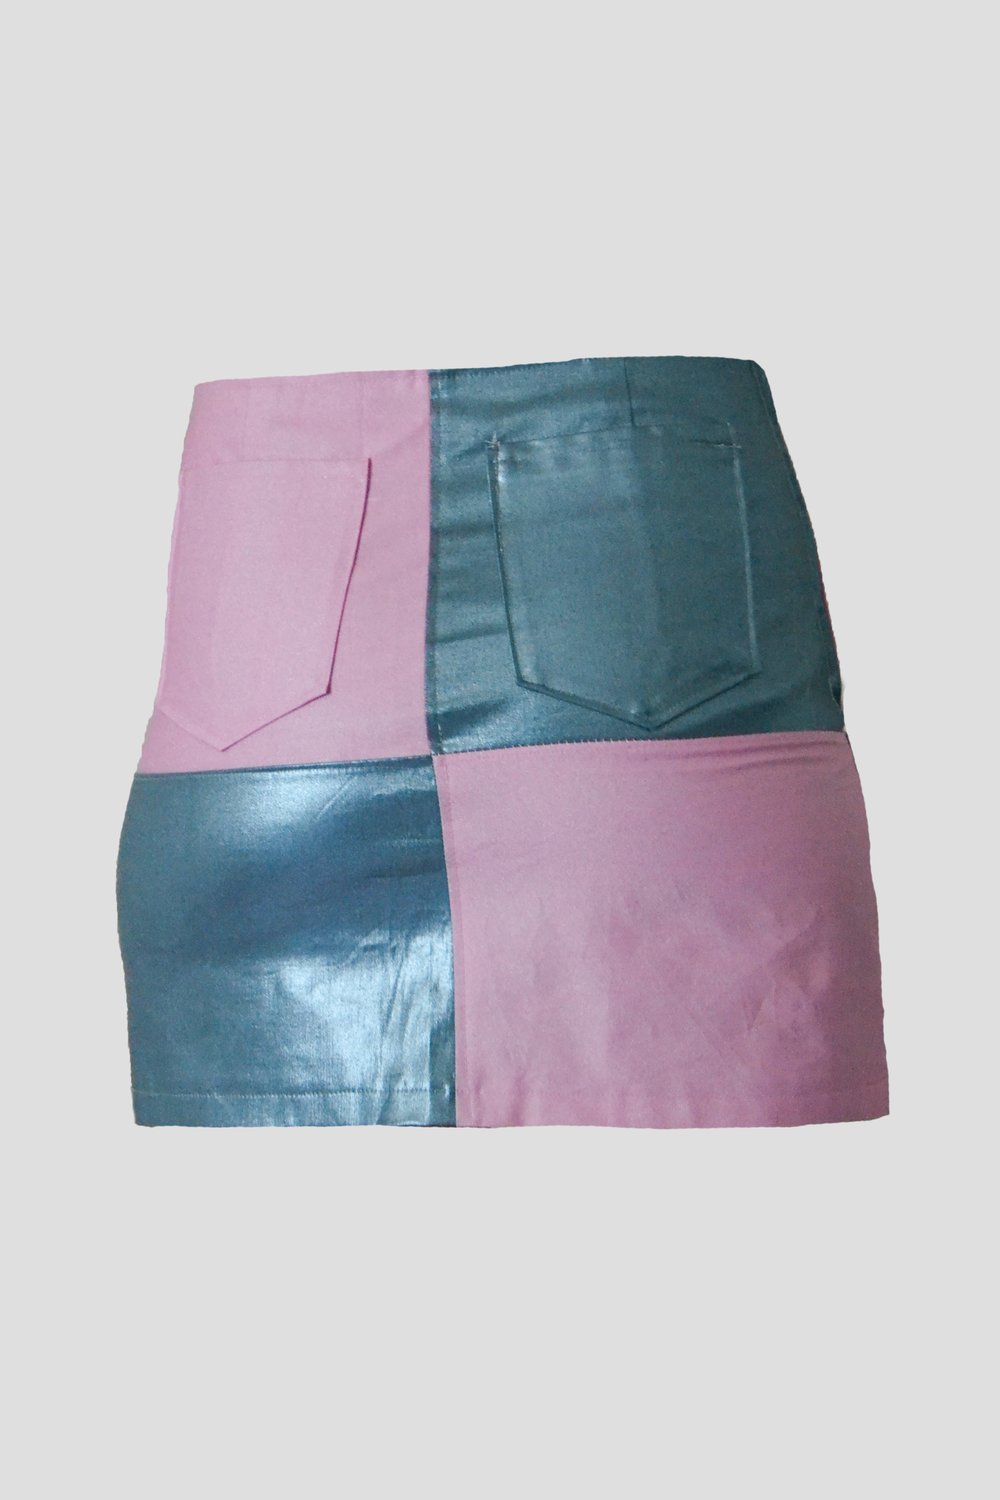 Image of 2 toned skirt